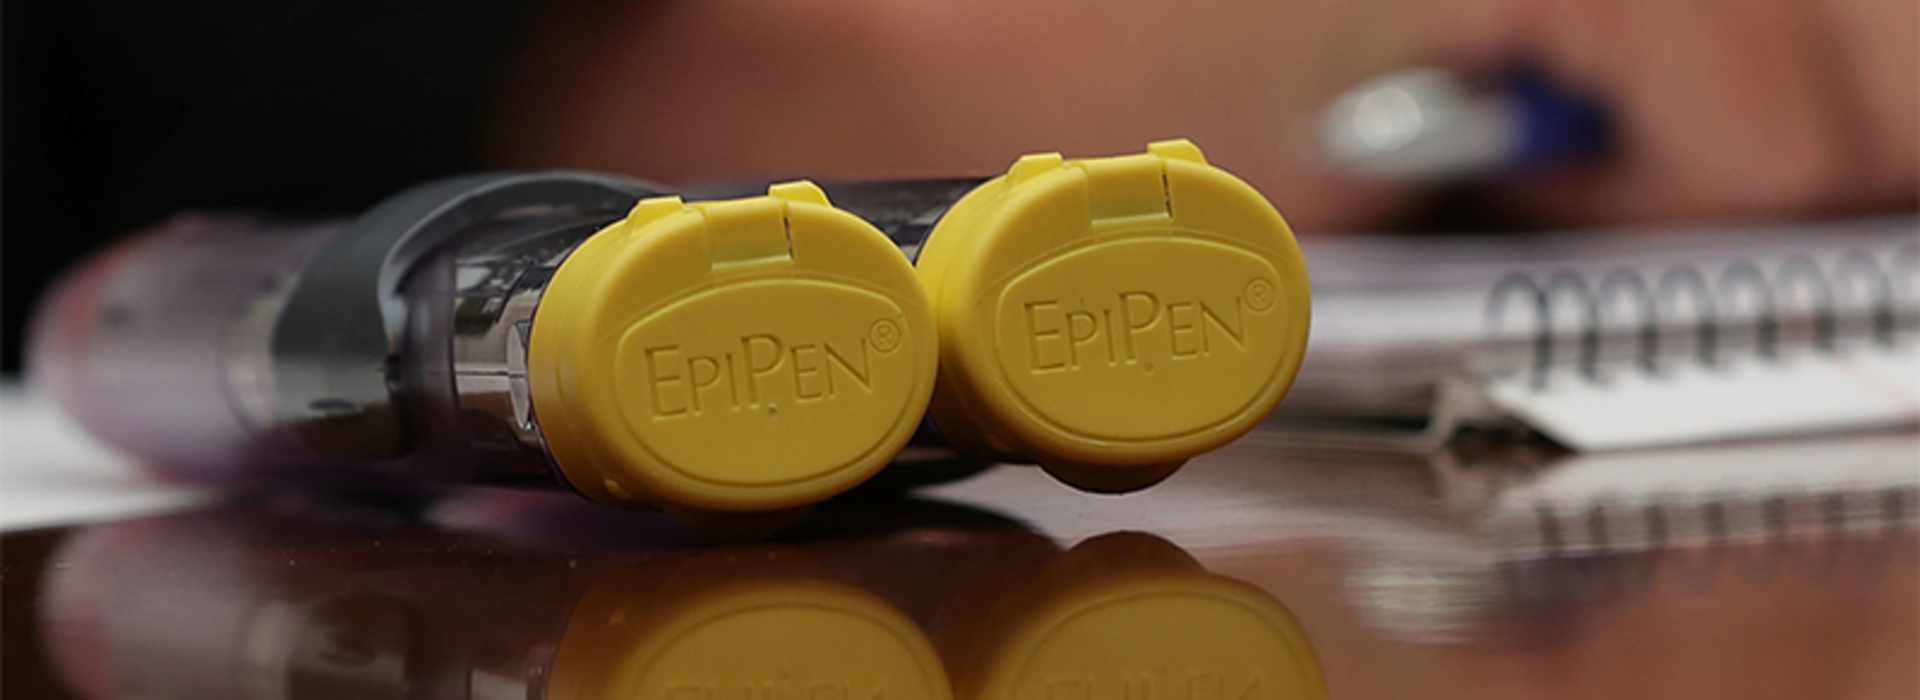 epipens